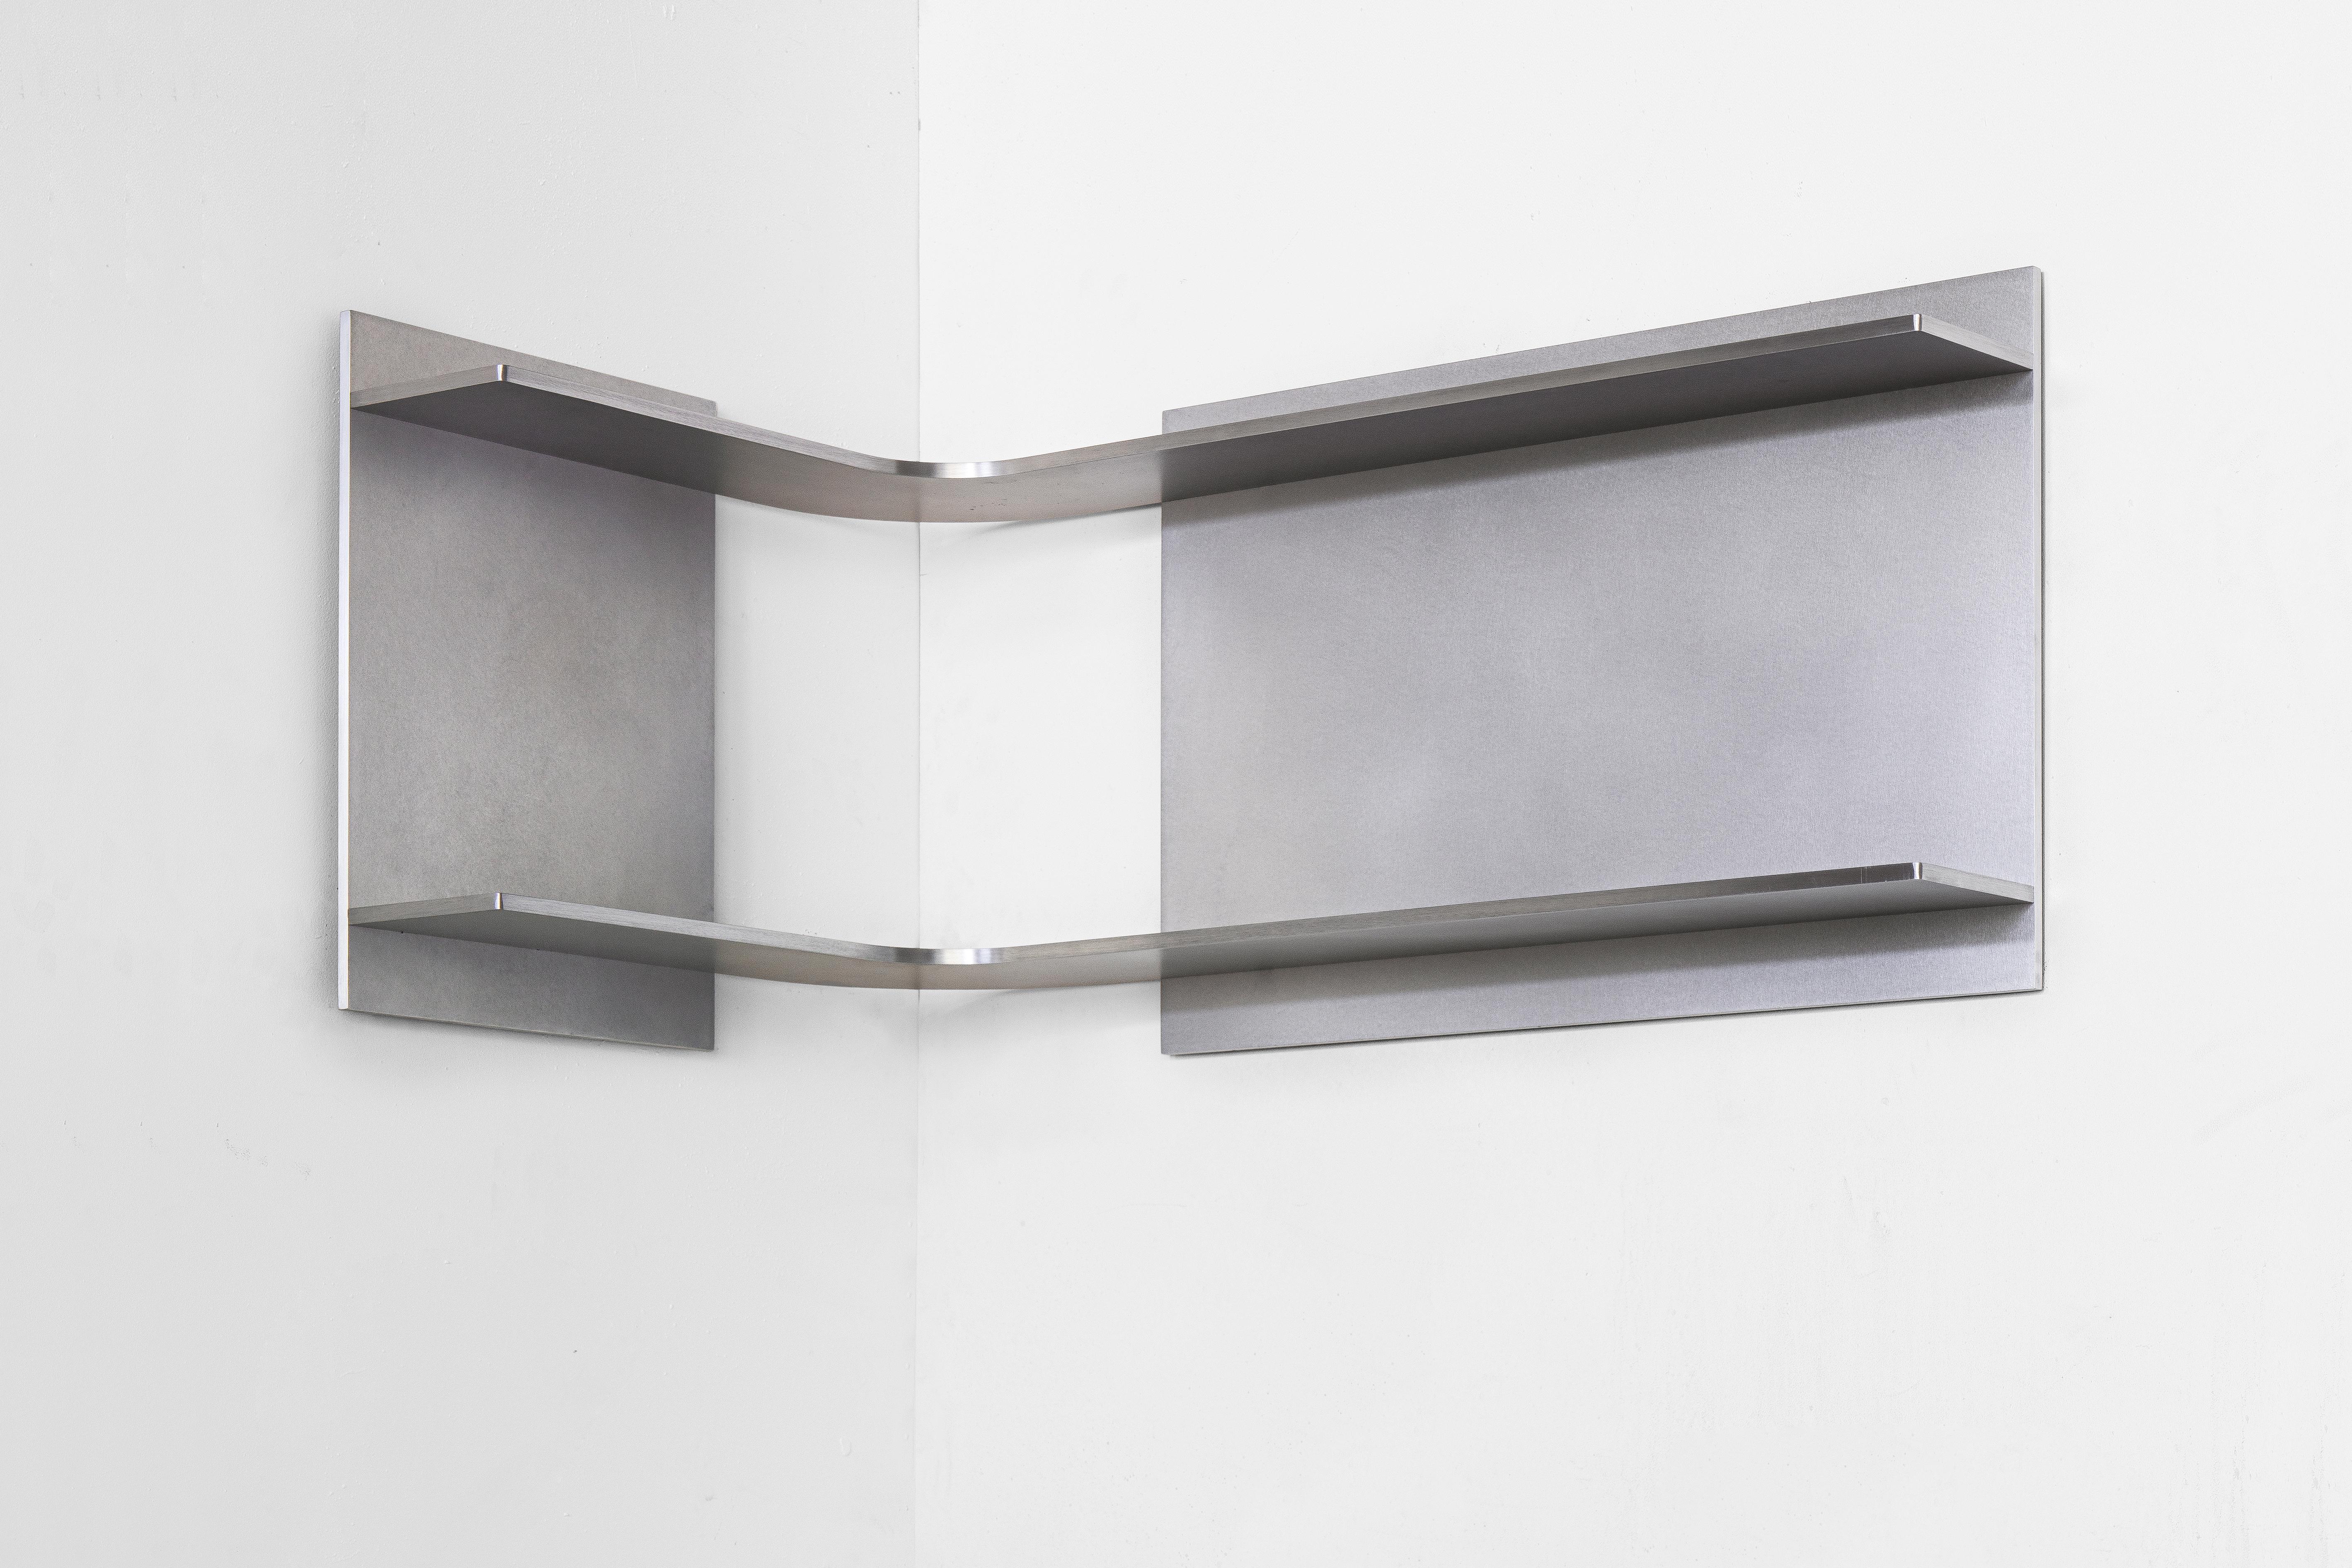 The Angle Shelf is designed and produced by Johan Viladrich in his atelier in the South of France. Both functional and sculptural, the piece uses the walls to create a unique display. The design is minimal and focuses the attention on the curve